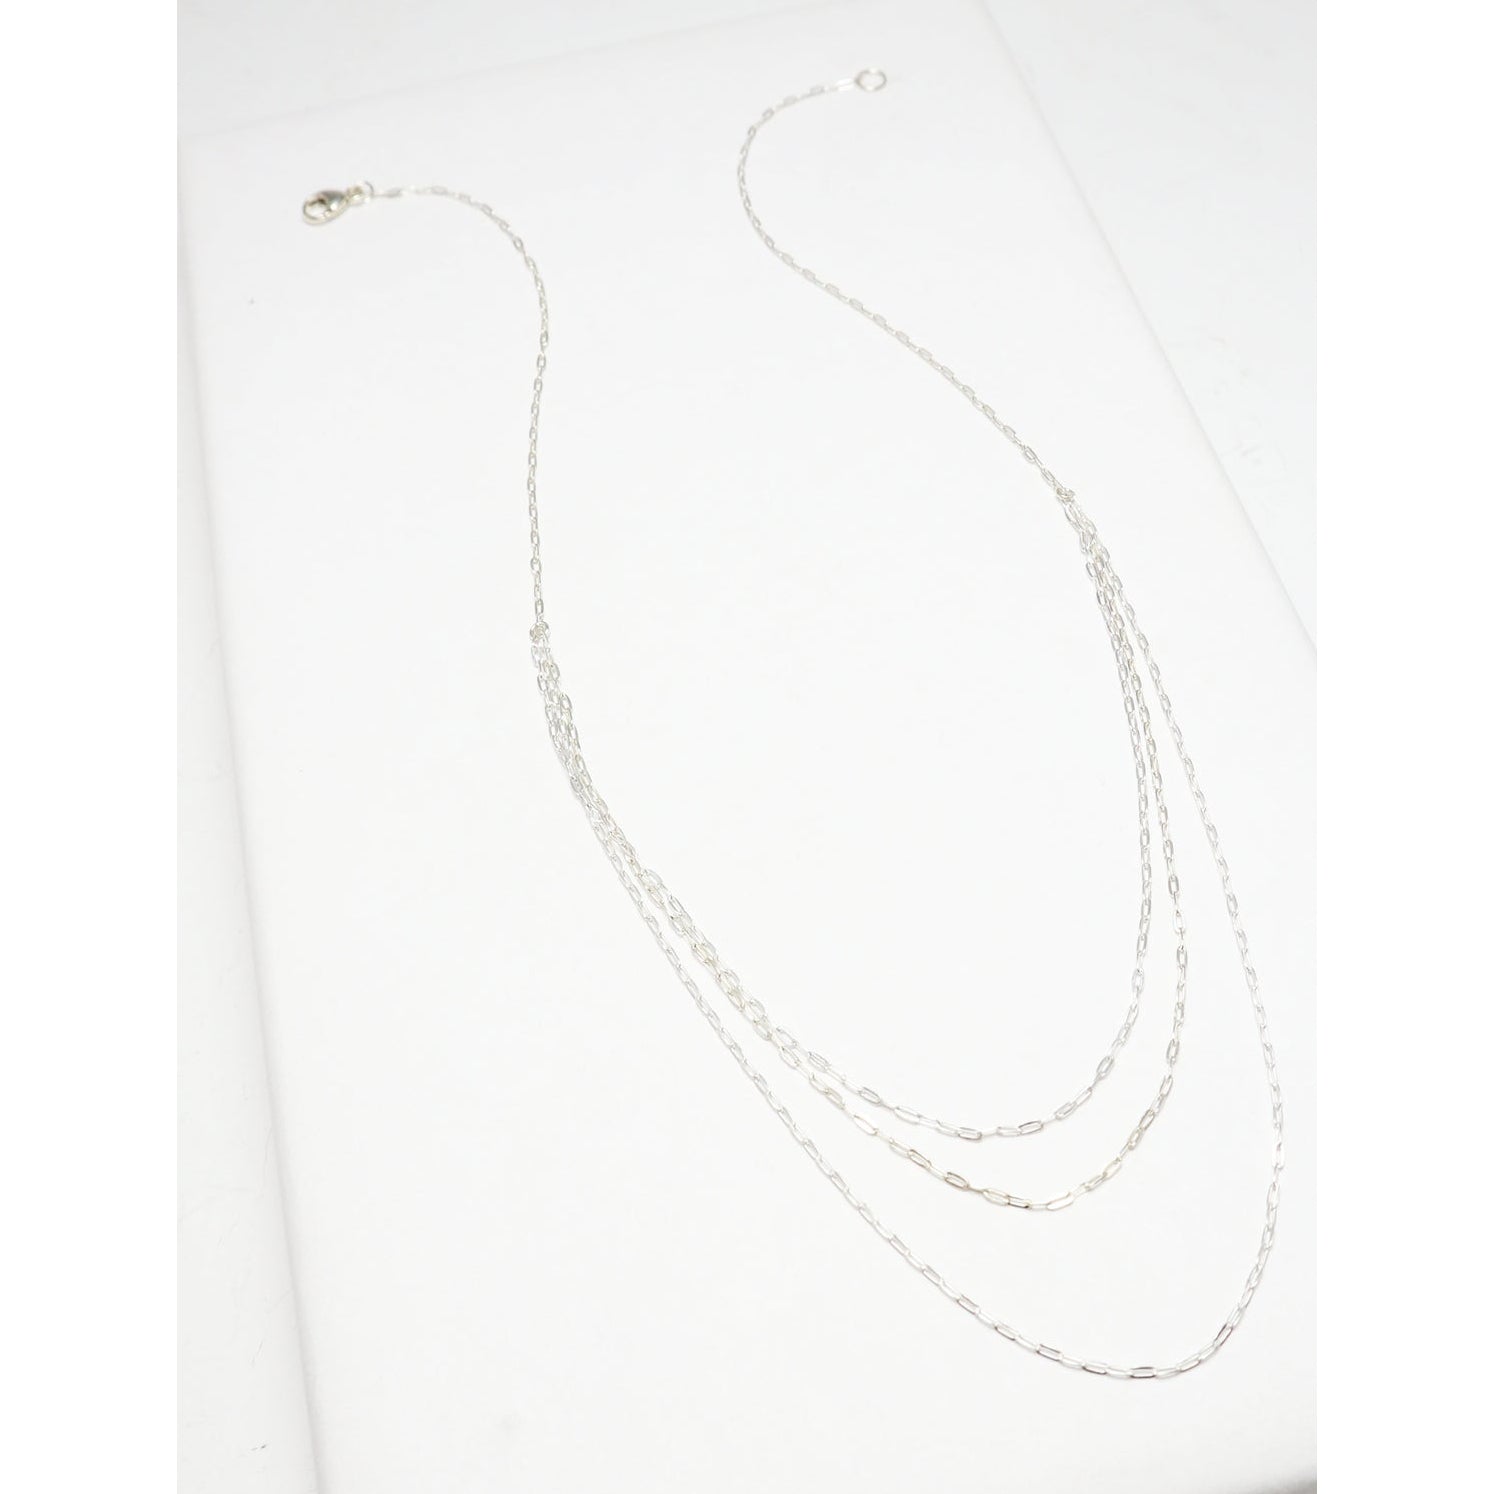 Darling Triple-Layered Necklace